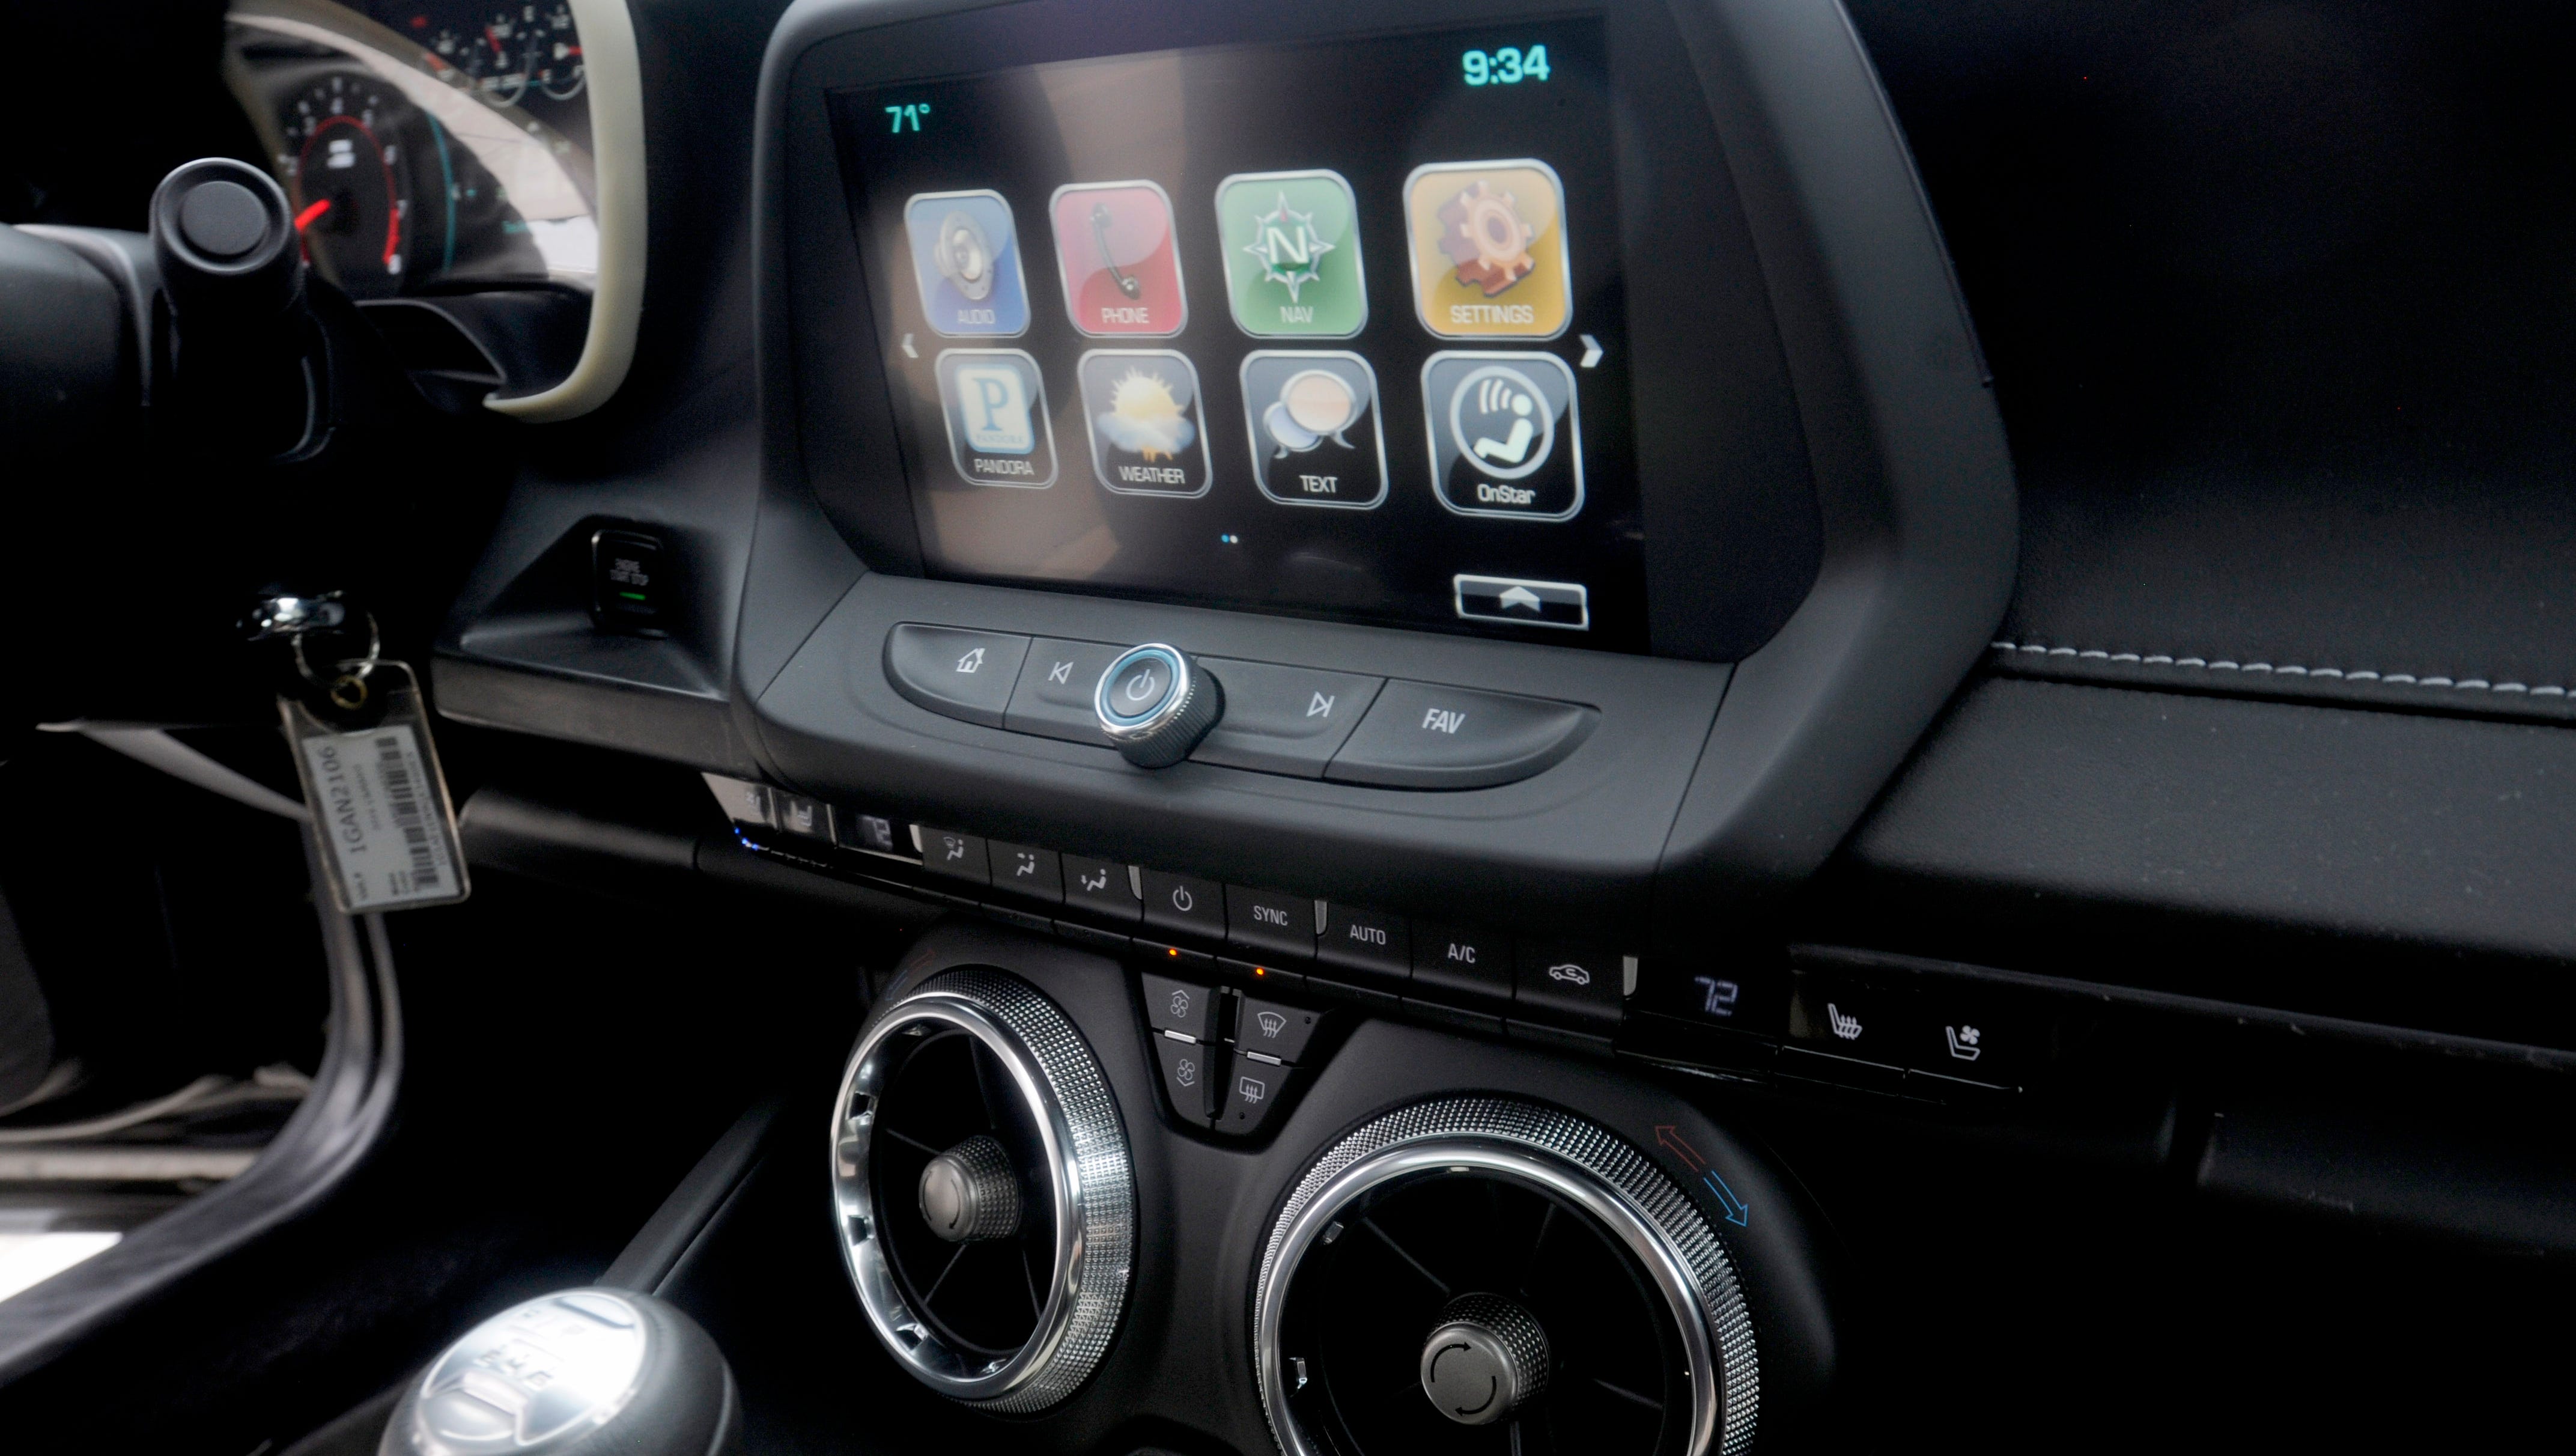 The information center of the dash is seen during a test day with the new Chevrolet Camaro.